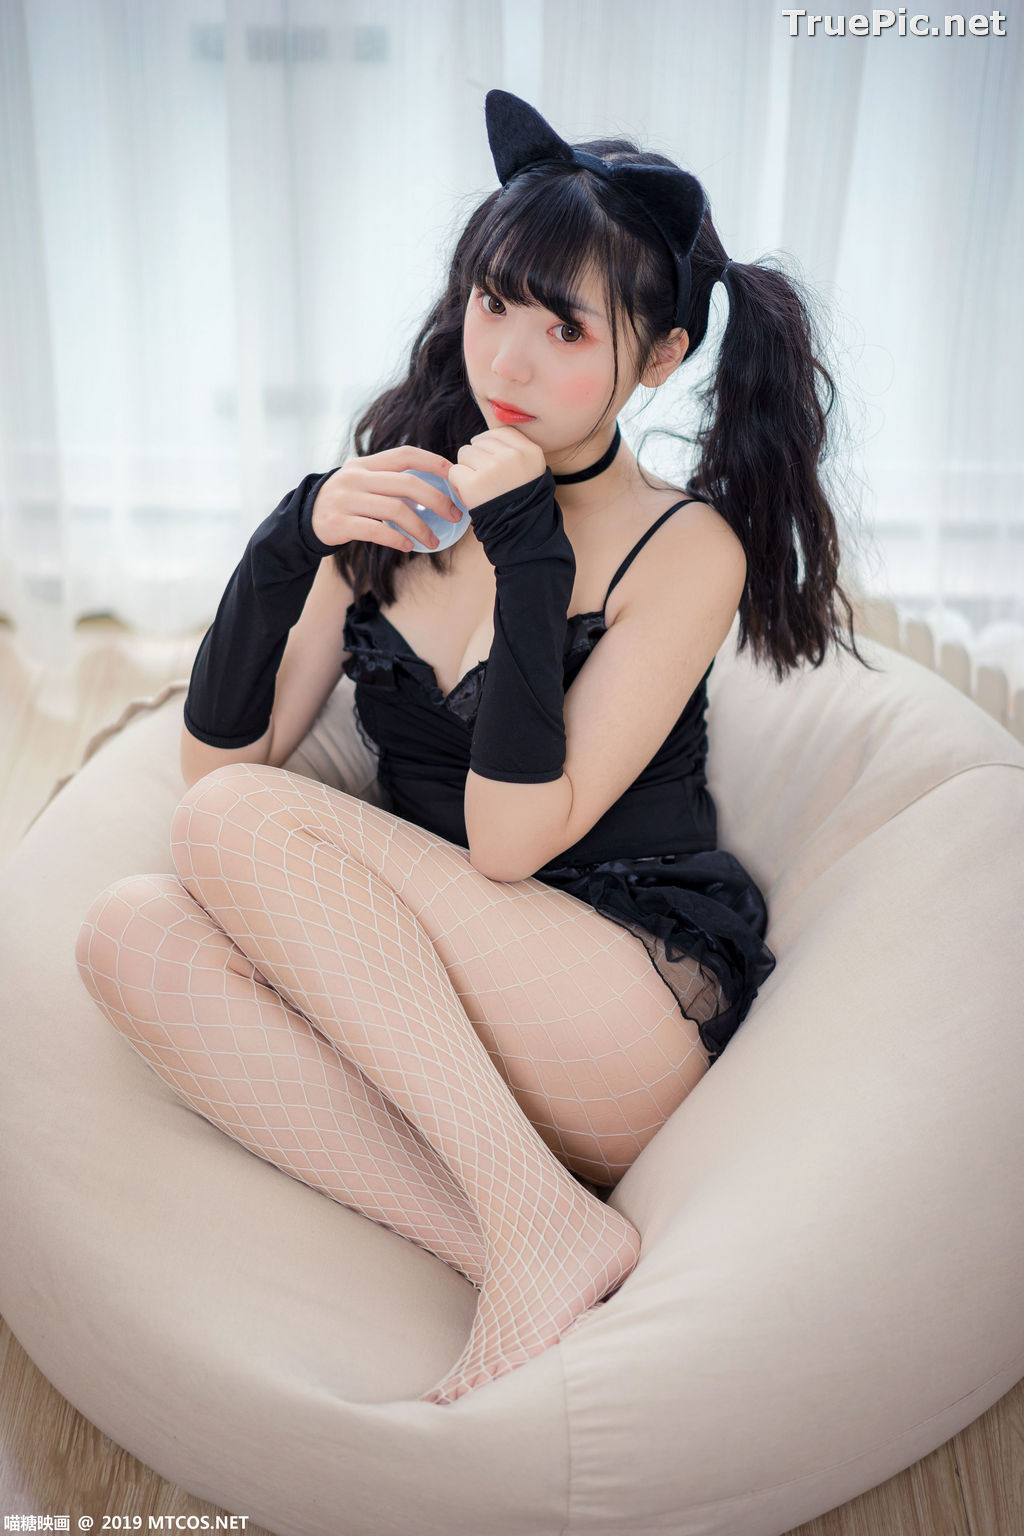 Image [MTCos] 喵糖映画 Vol.045 – Chinese Cute Model – Black Cat Girl - TruePic.net - Picture-10